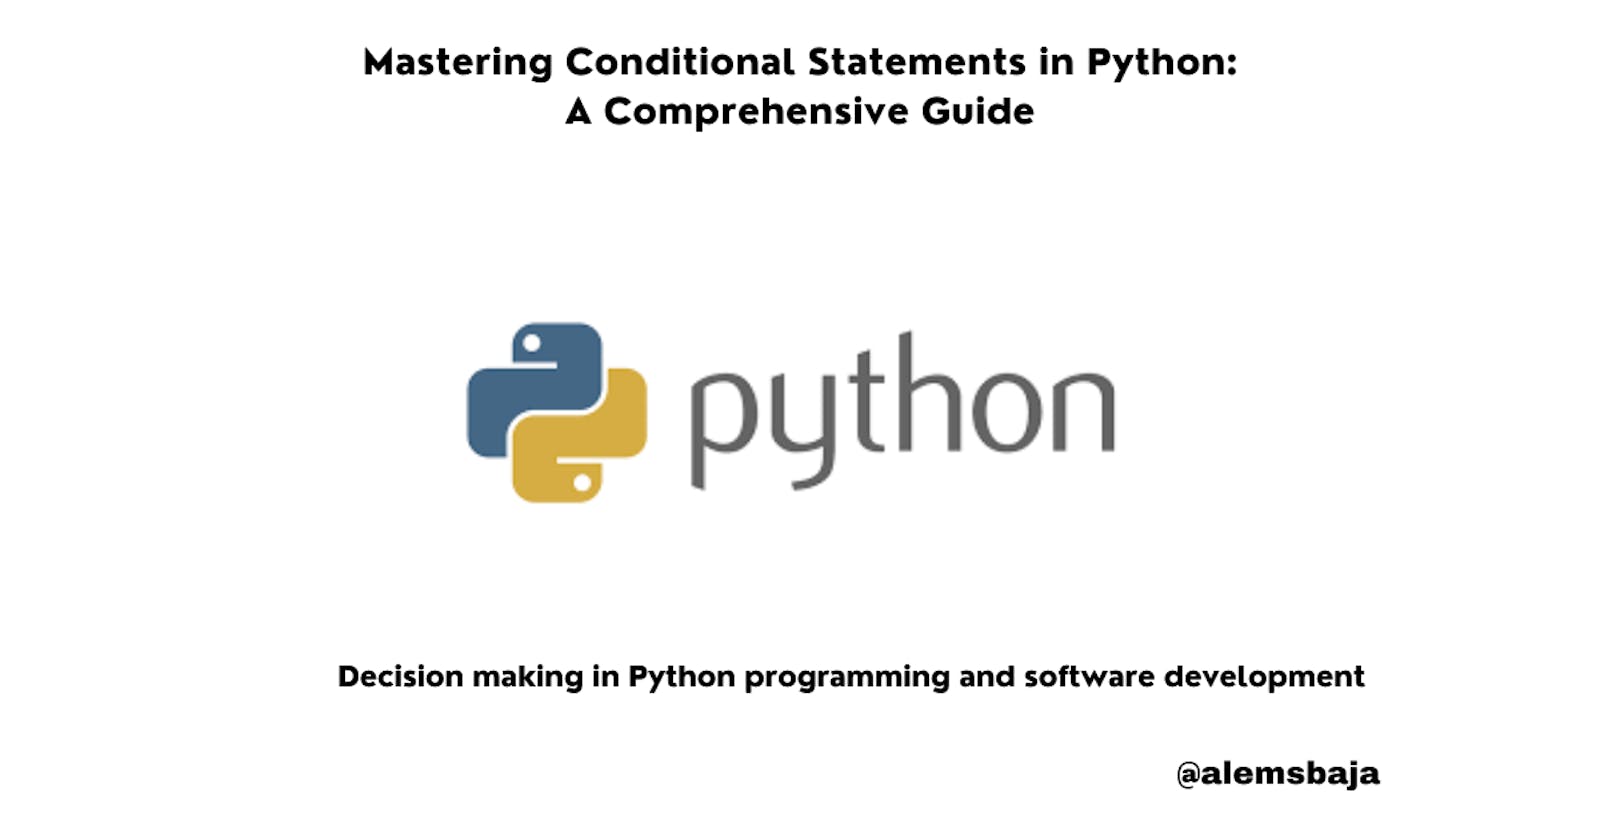 Mastering Conditional Statements in Python: A Comprehensive Guide